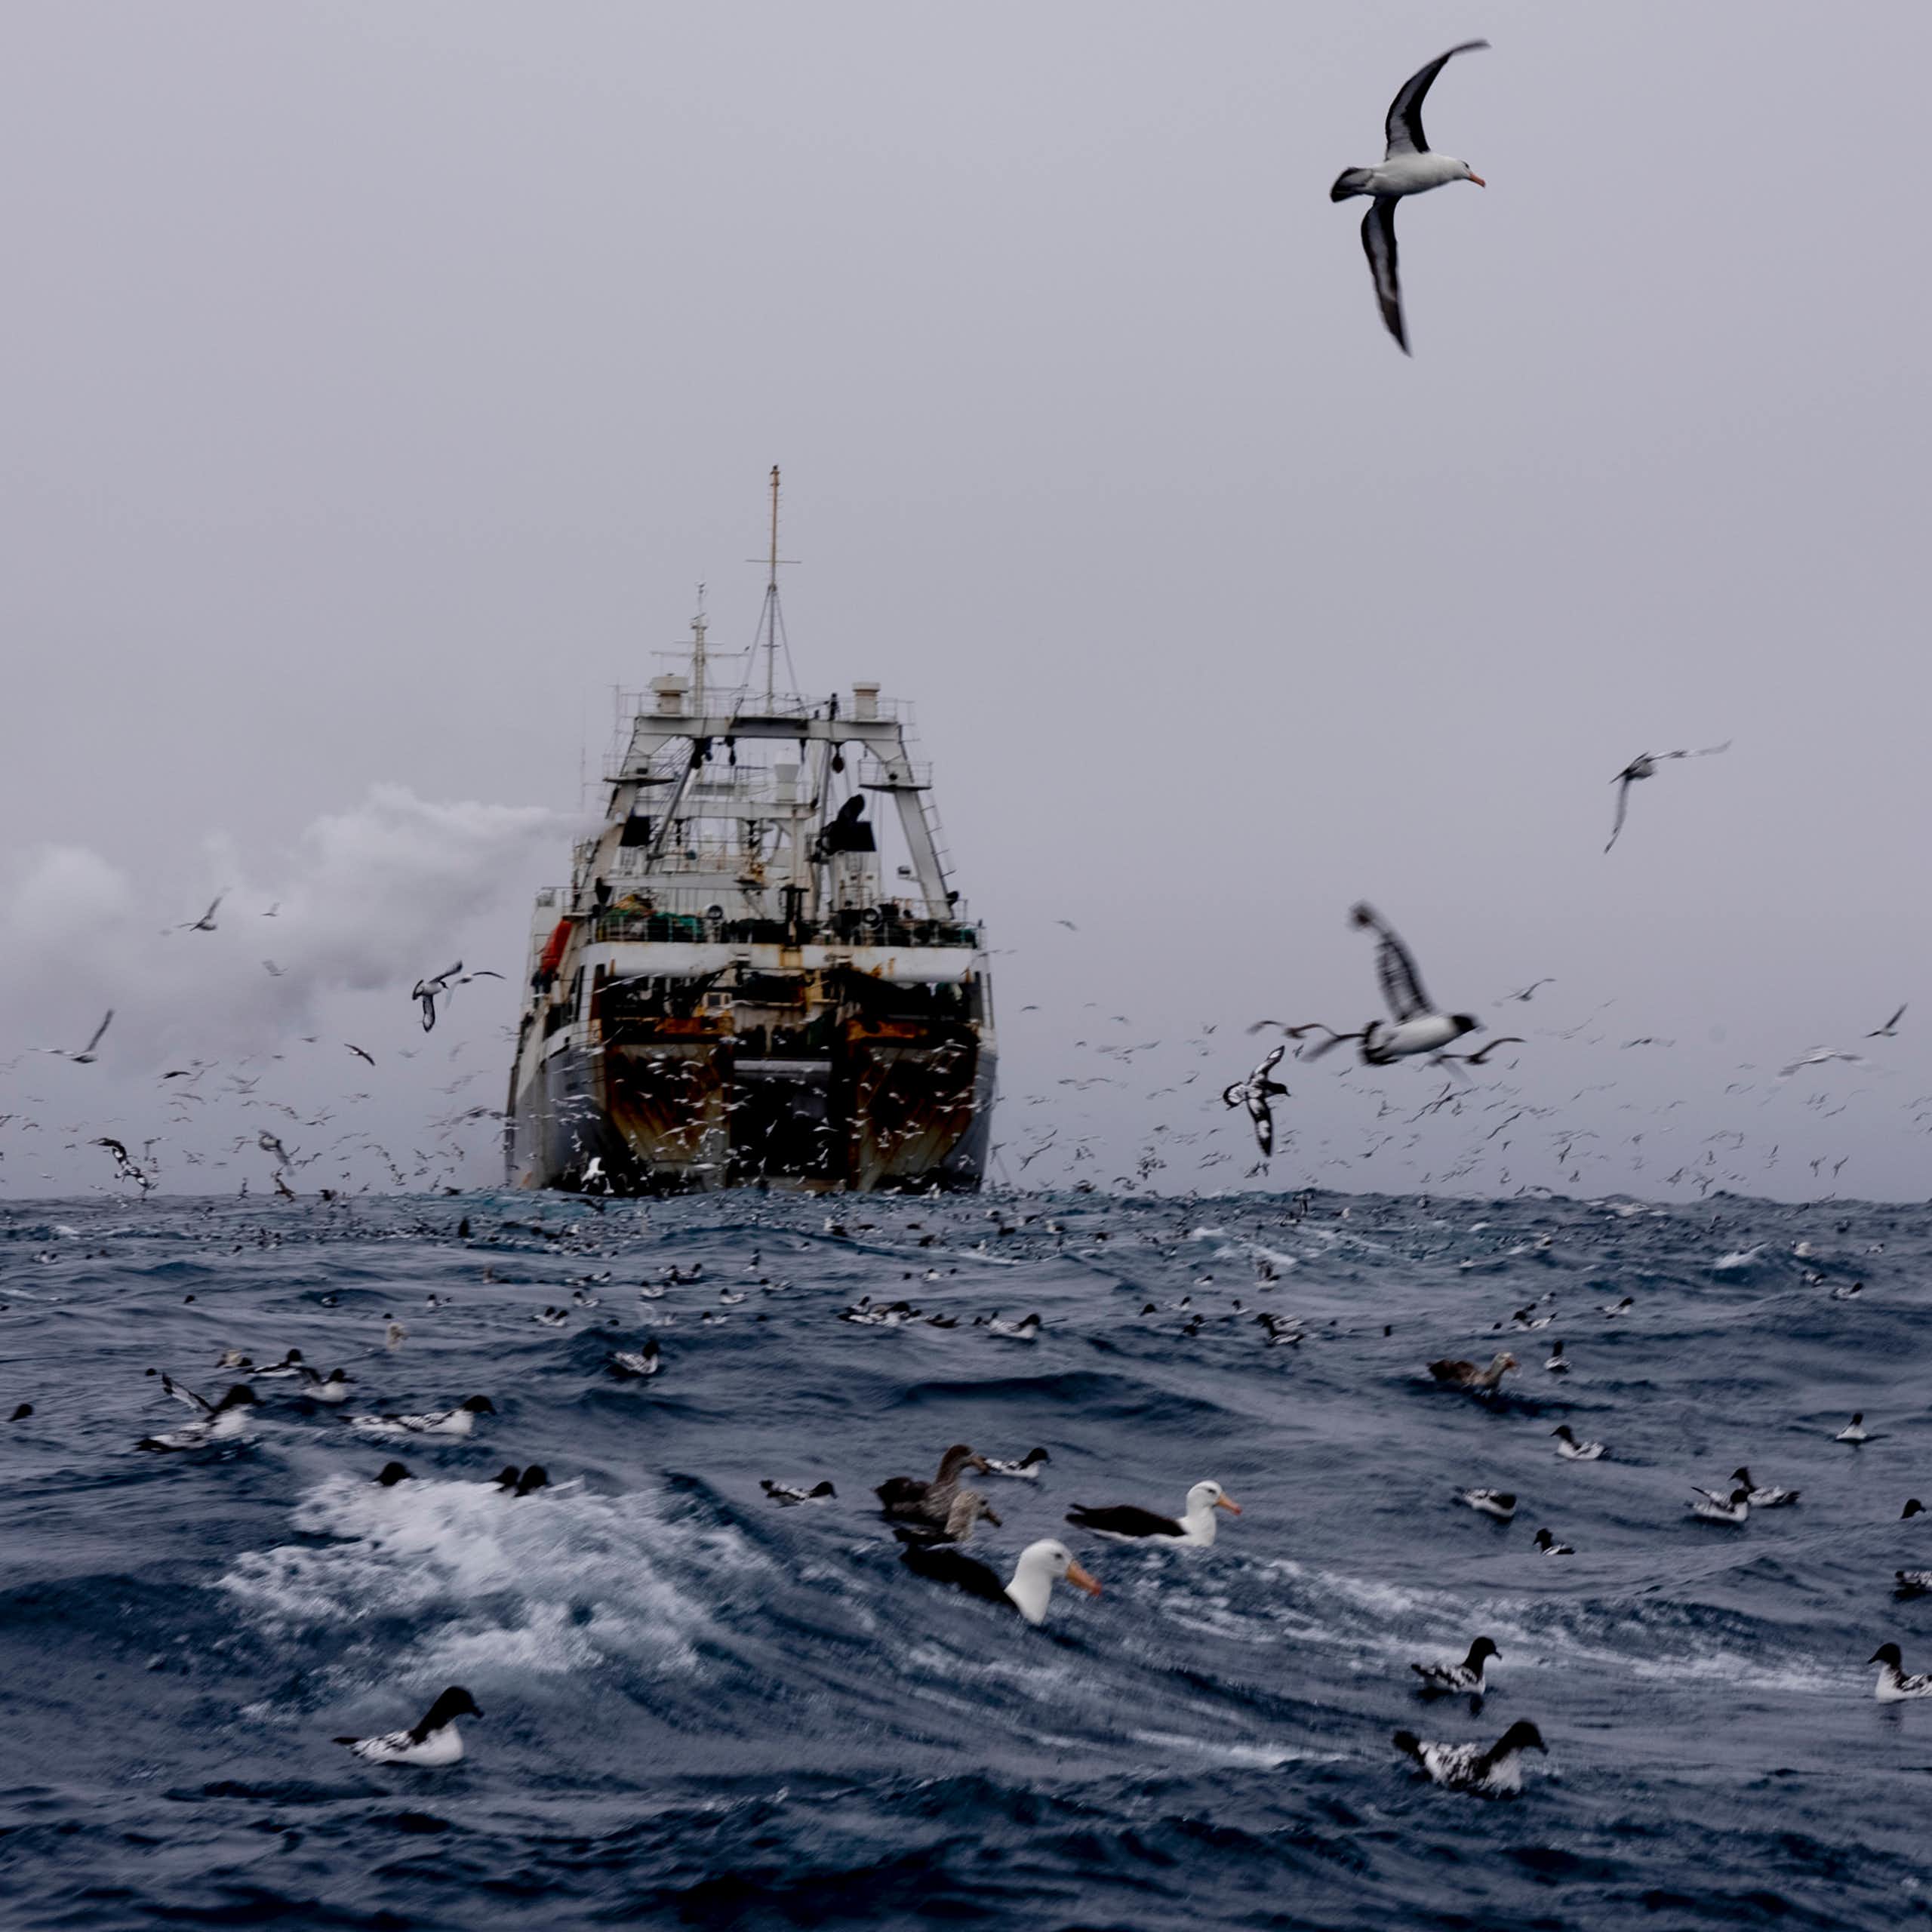 A large ship on the ocean while a flock of grey and white birds fly near it